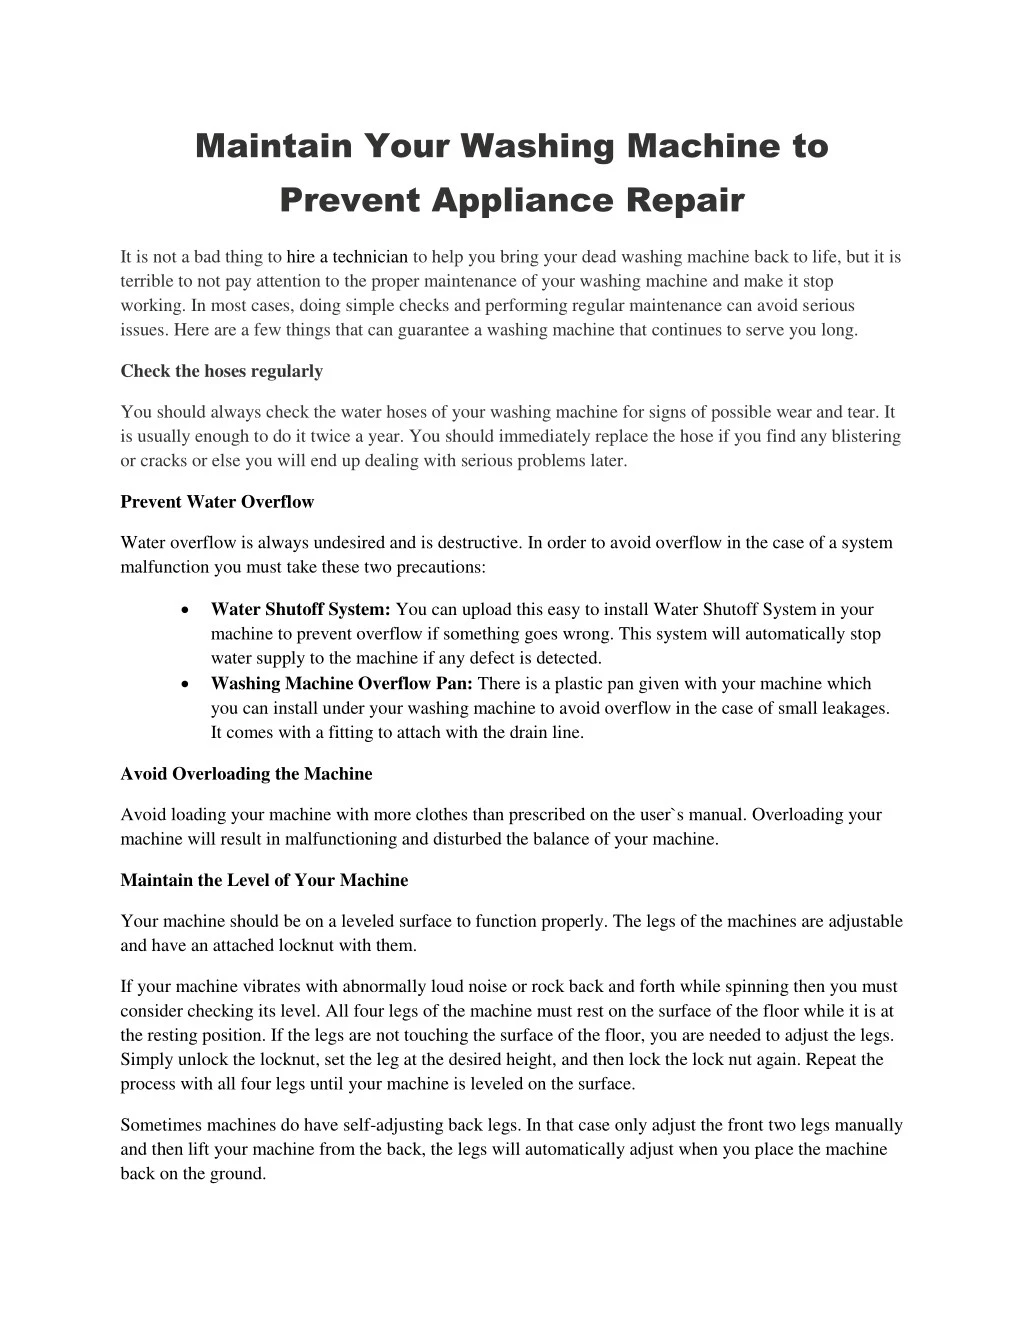 maintain your washing machine to prevent